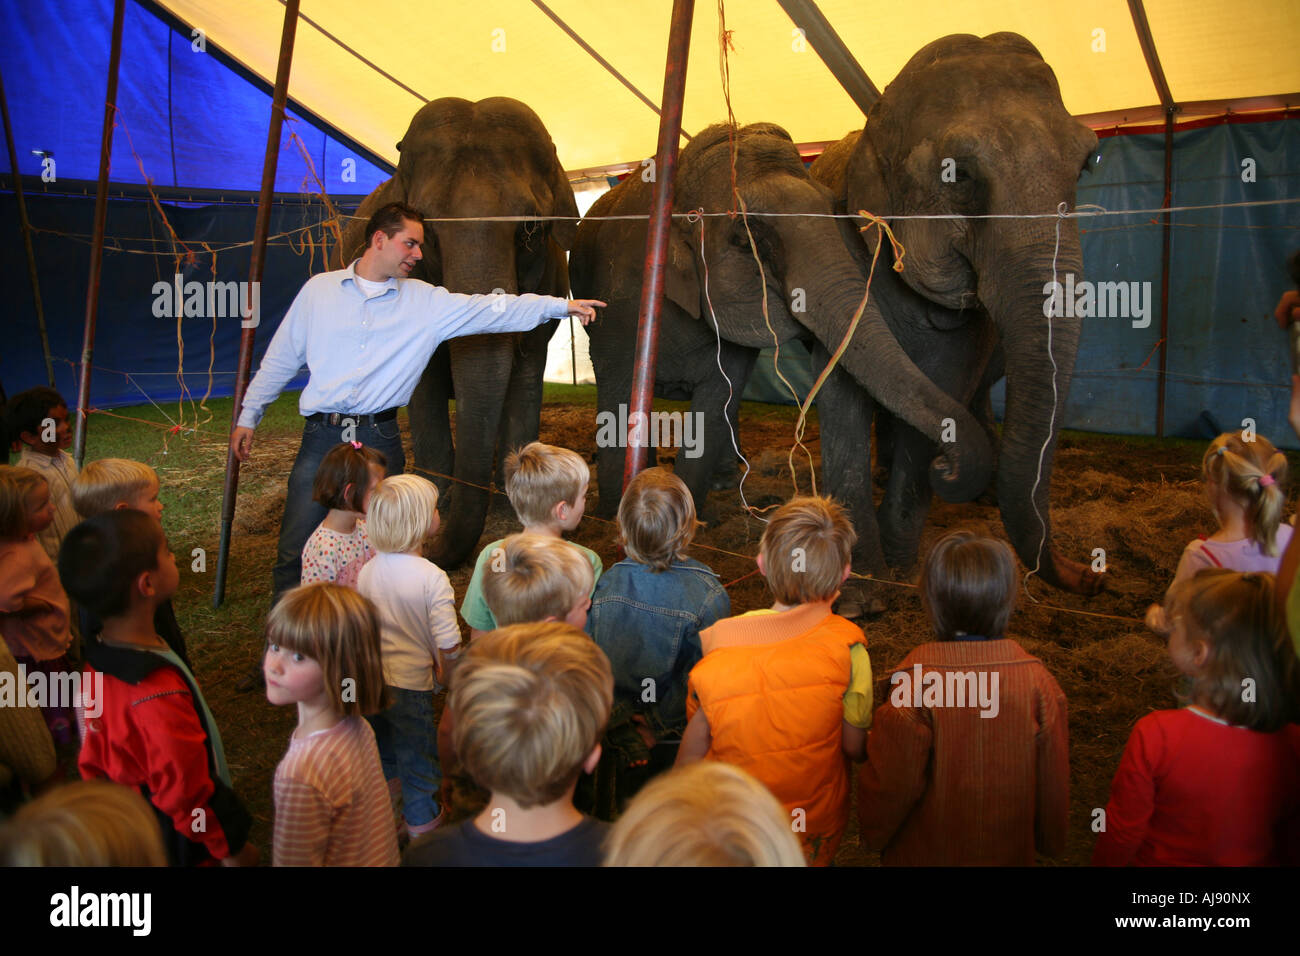 Circus trainer taking care of the elephants Stock Photo